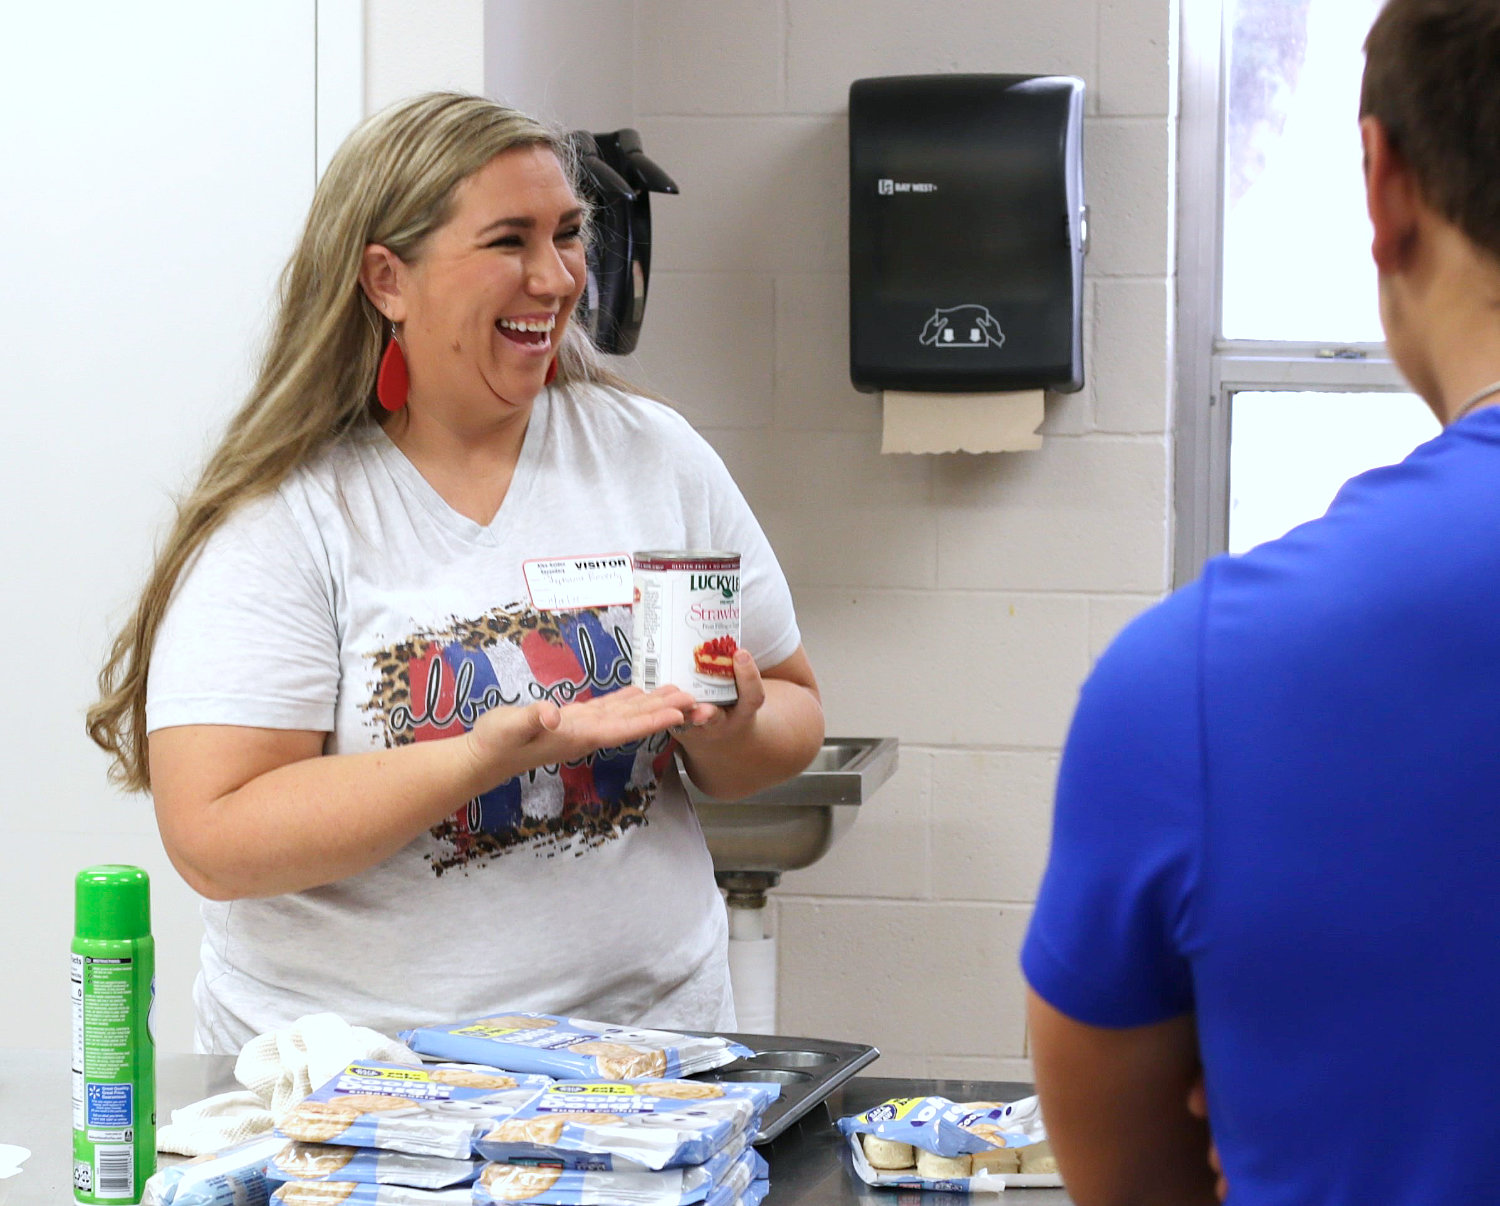 Stephanie Beverly shares a laugh with seniors while discussing meal preparation in the high school kitchen.